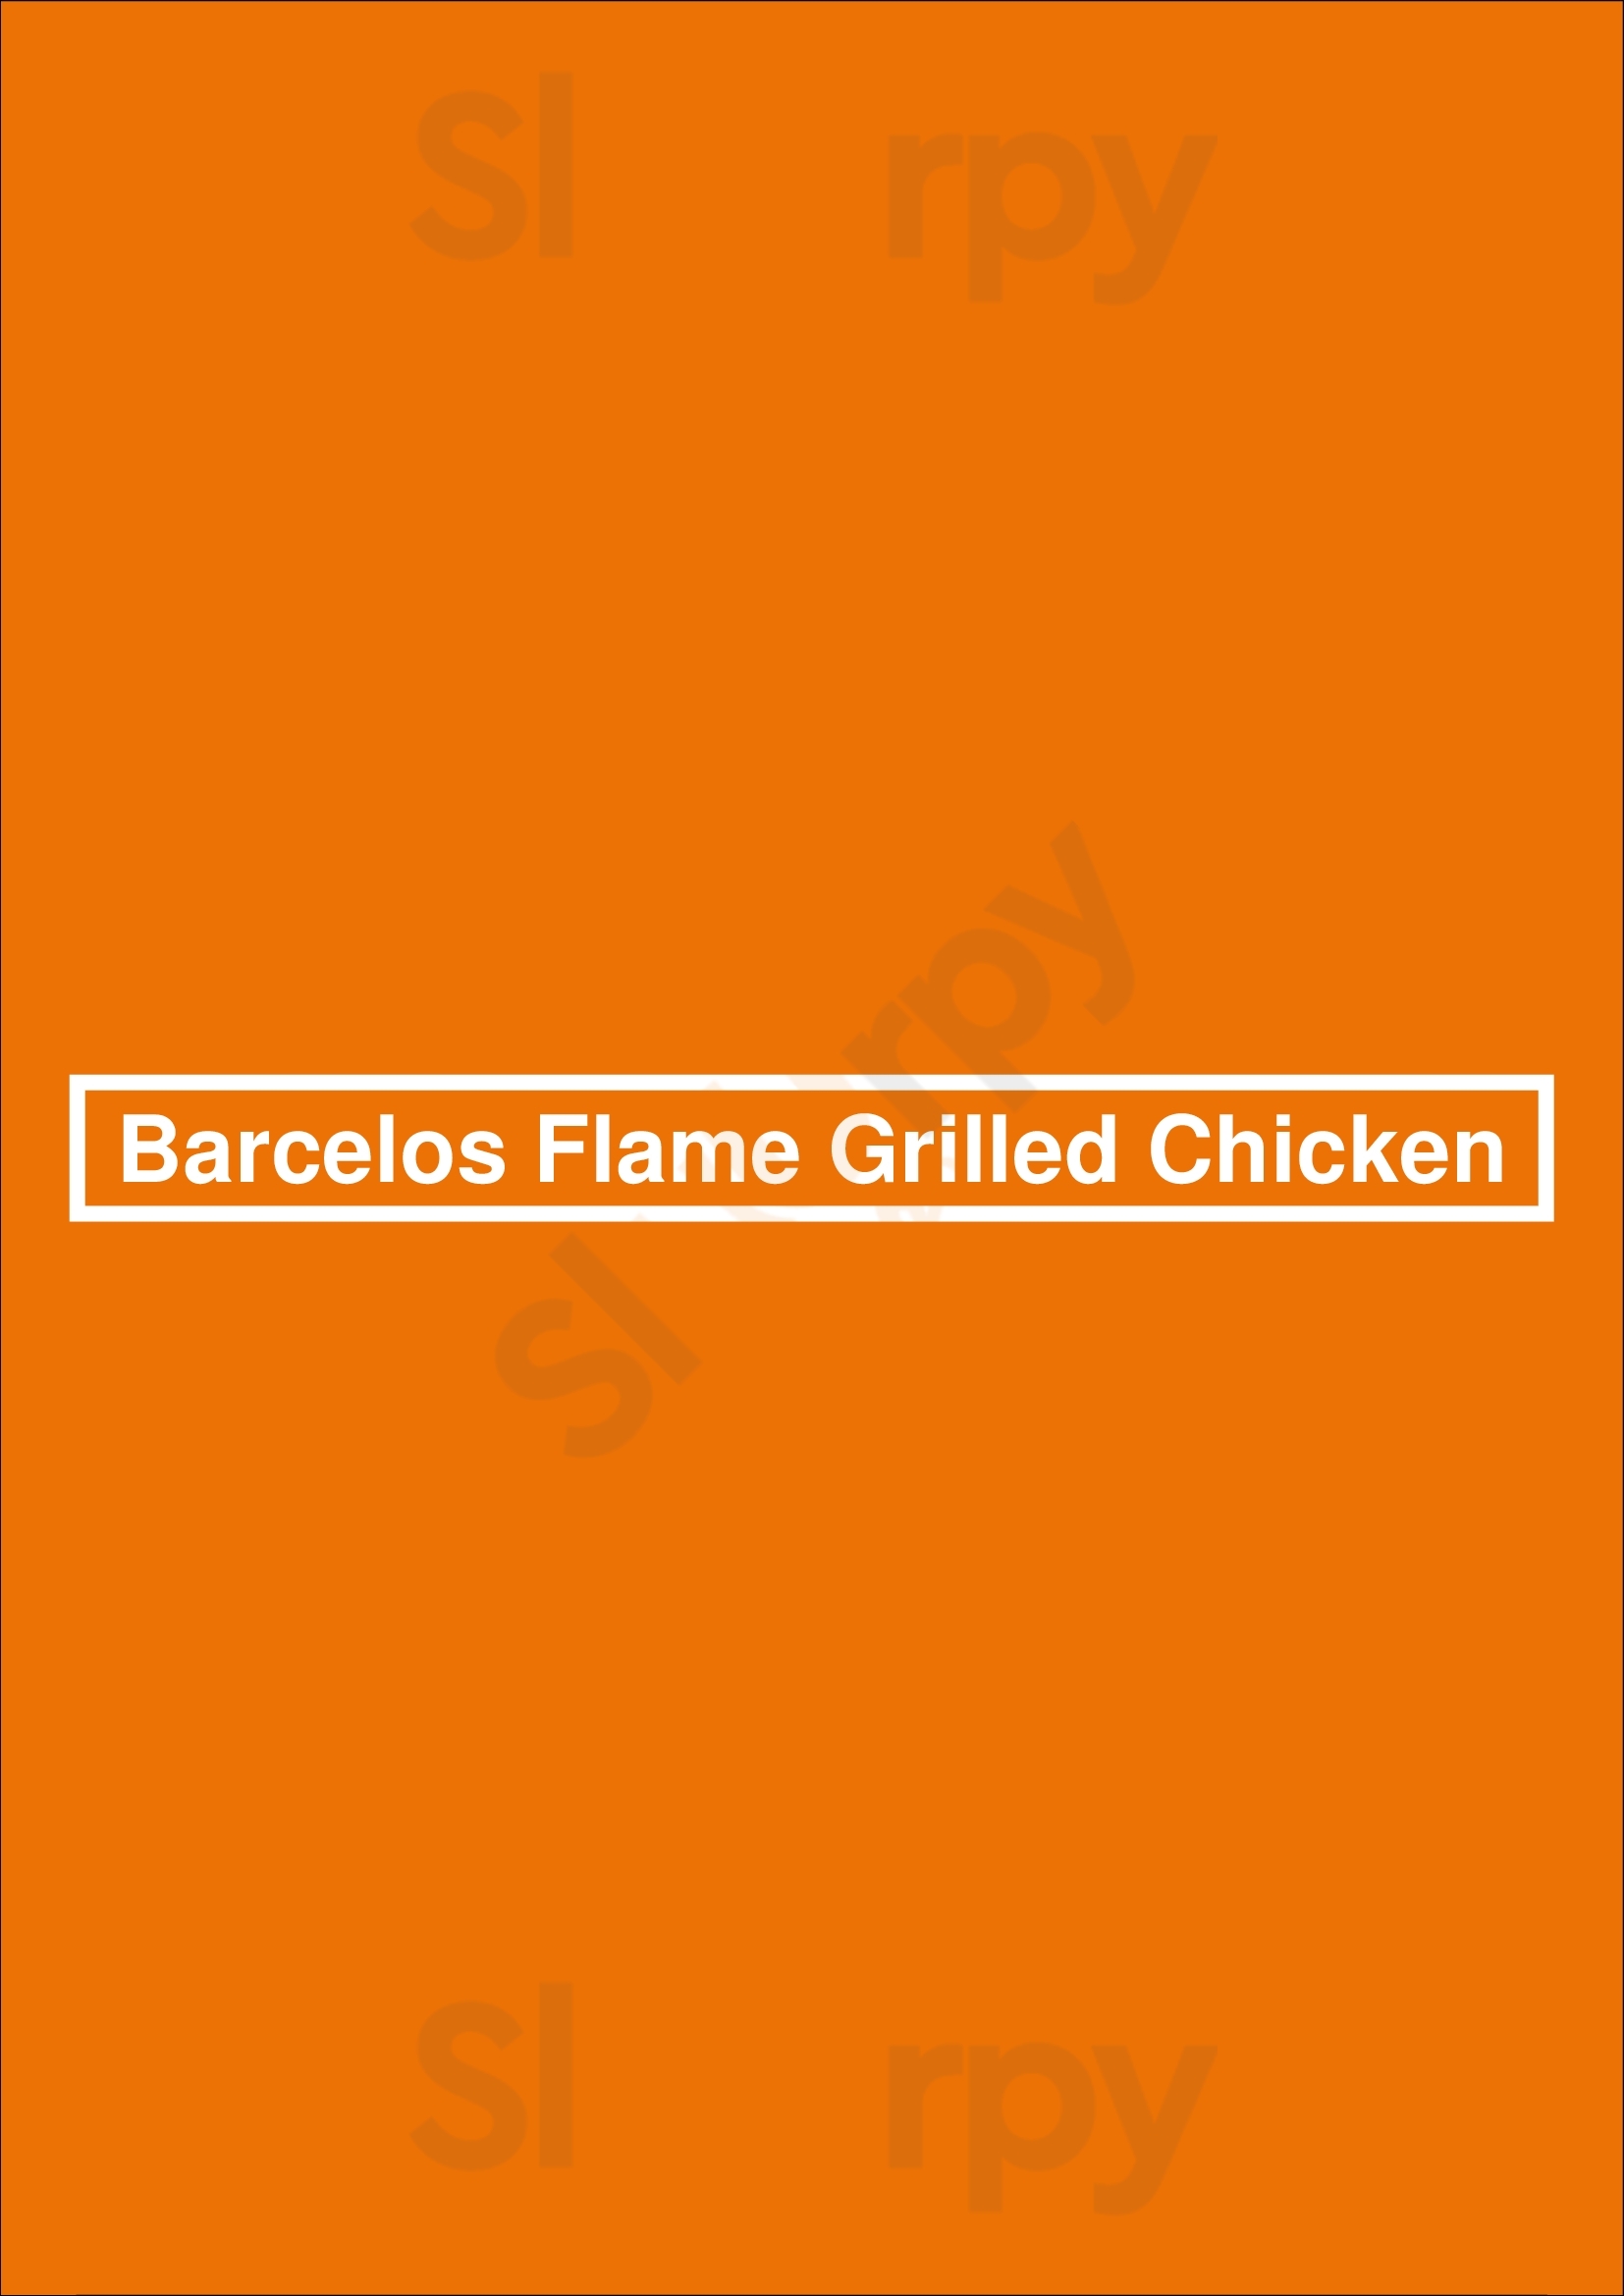 Barcelos Flame Grilled Chicken Abbotsford Menu - 1